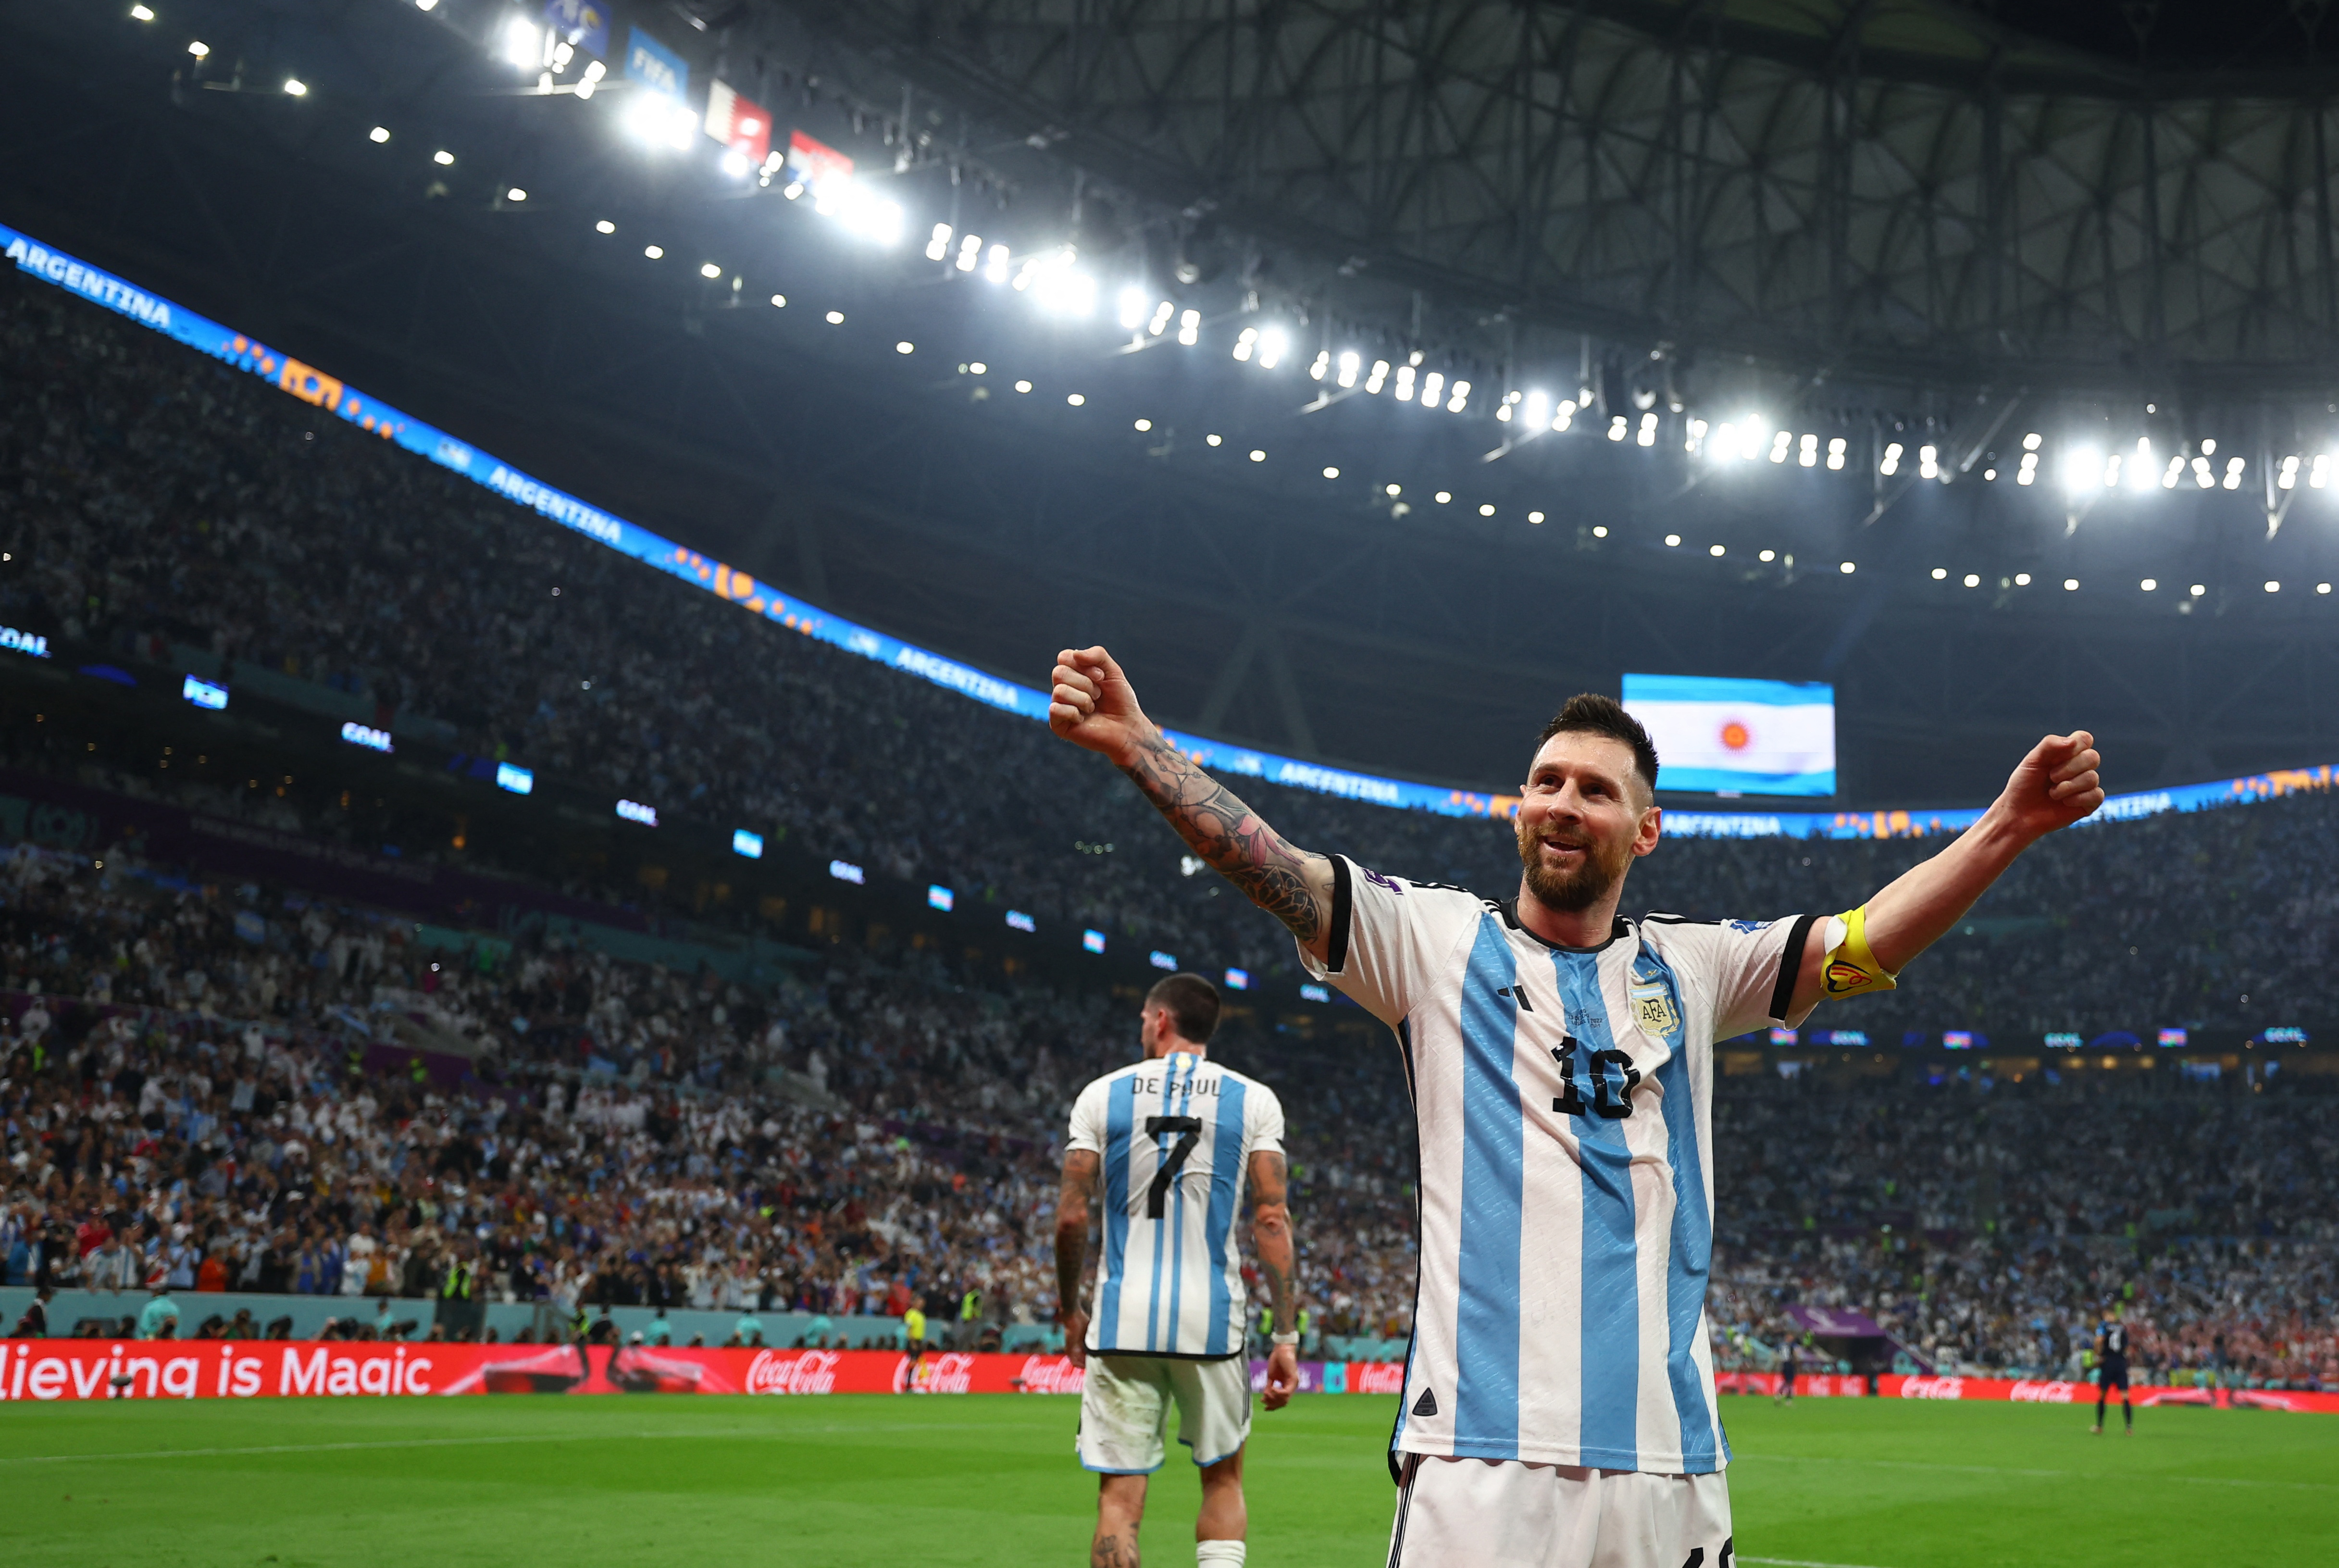 Argentina's Lionel Messi: World Cup goals, stats and career